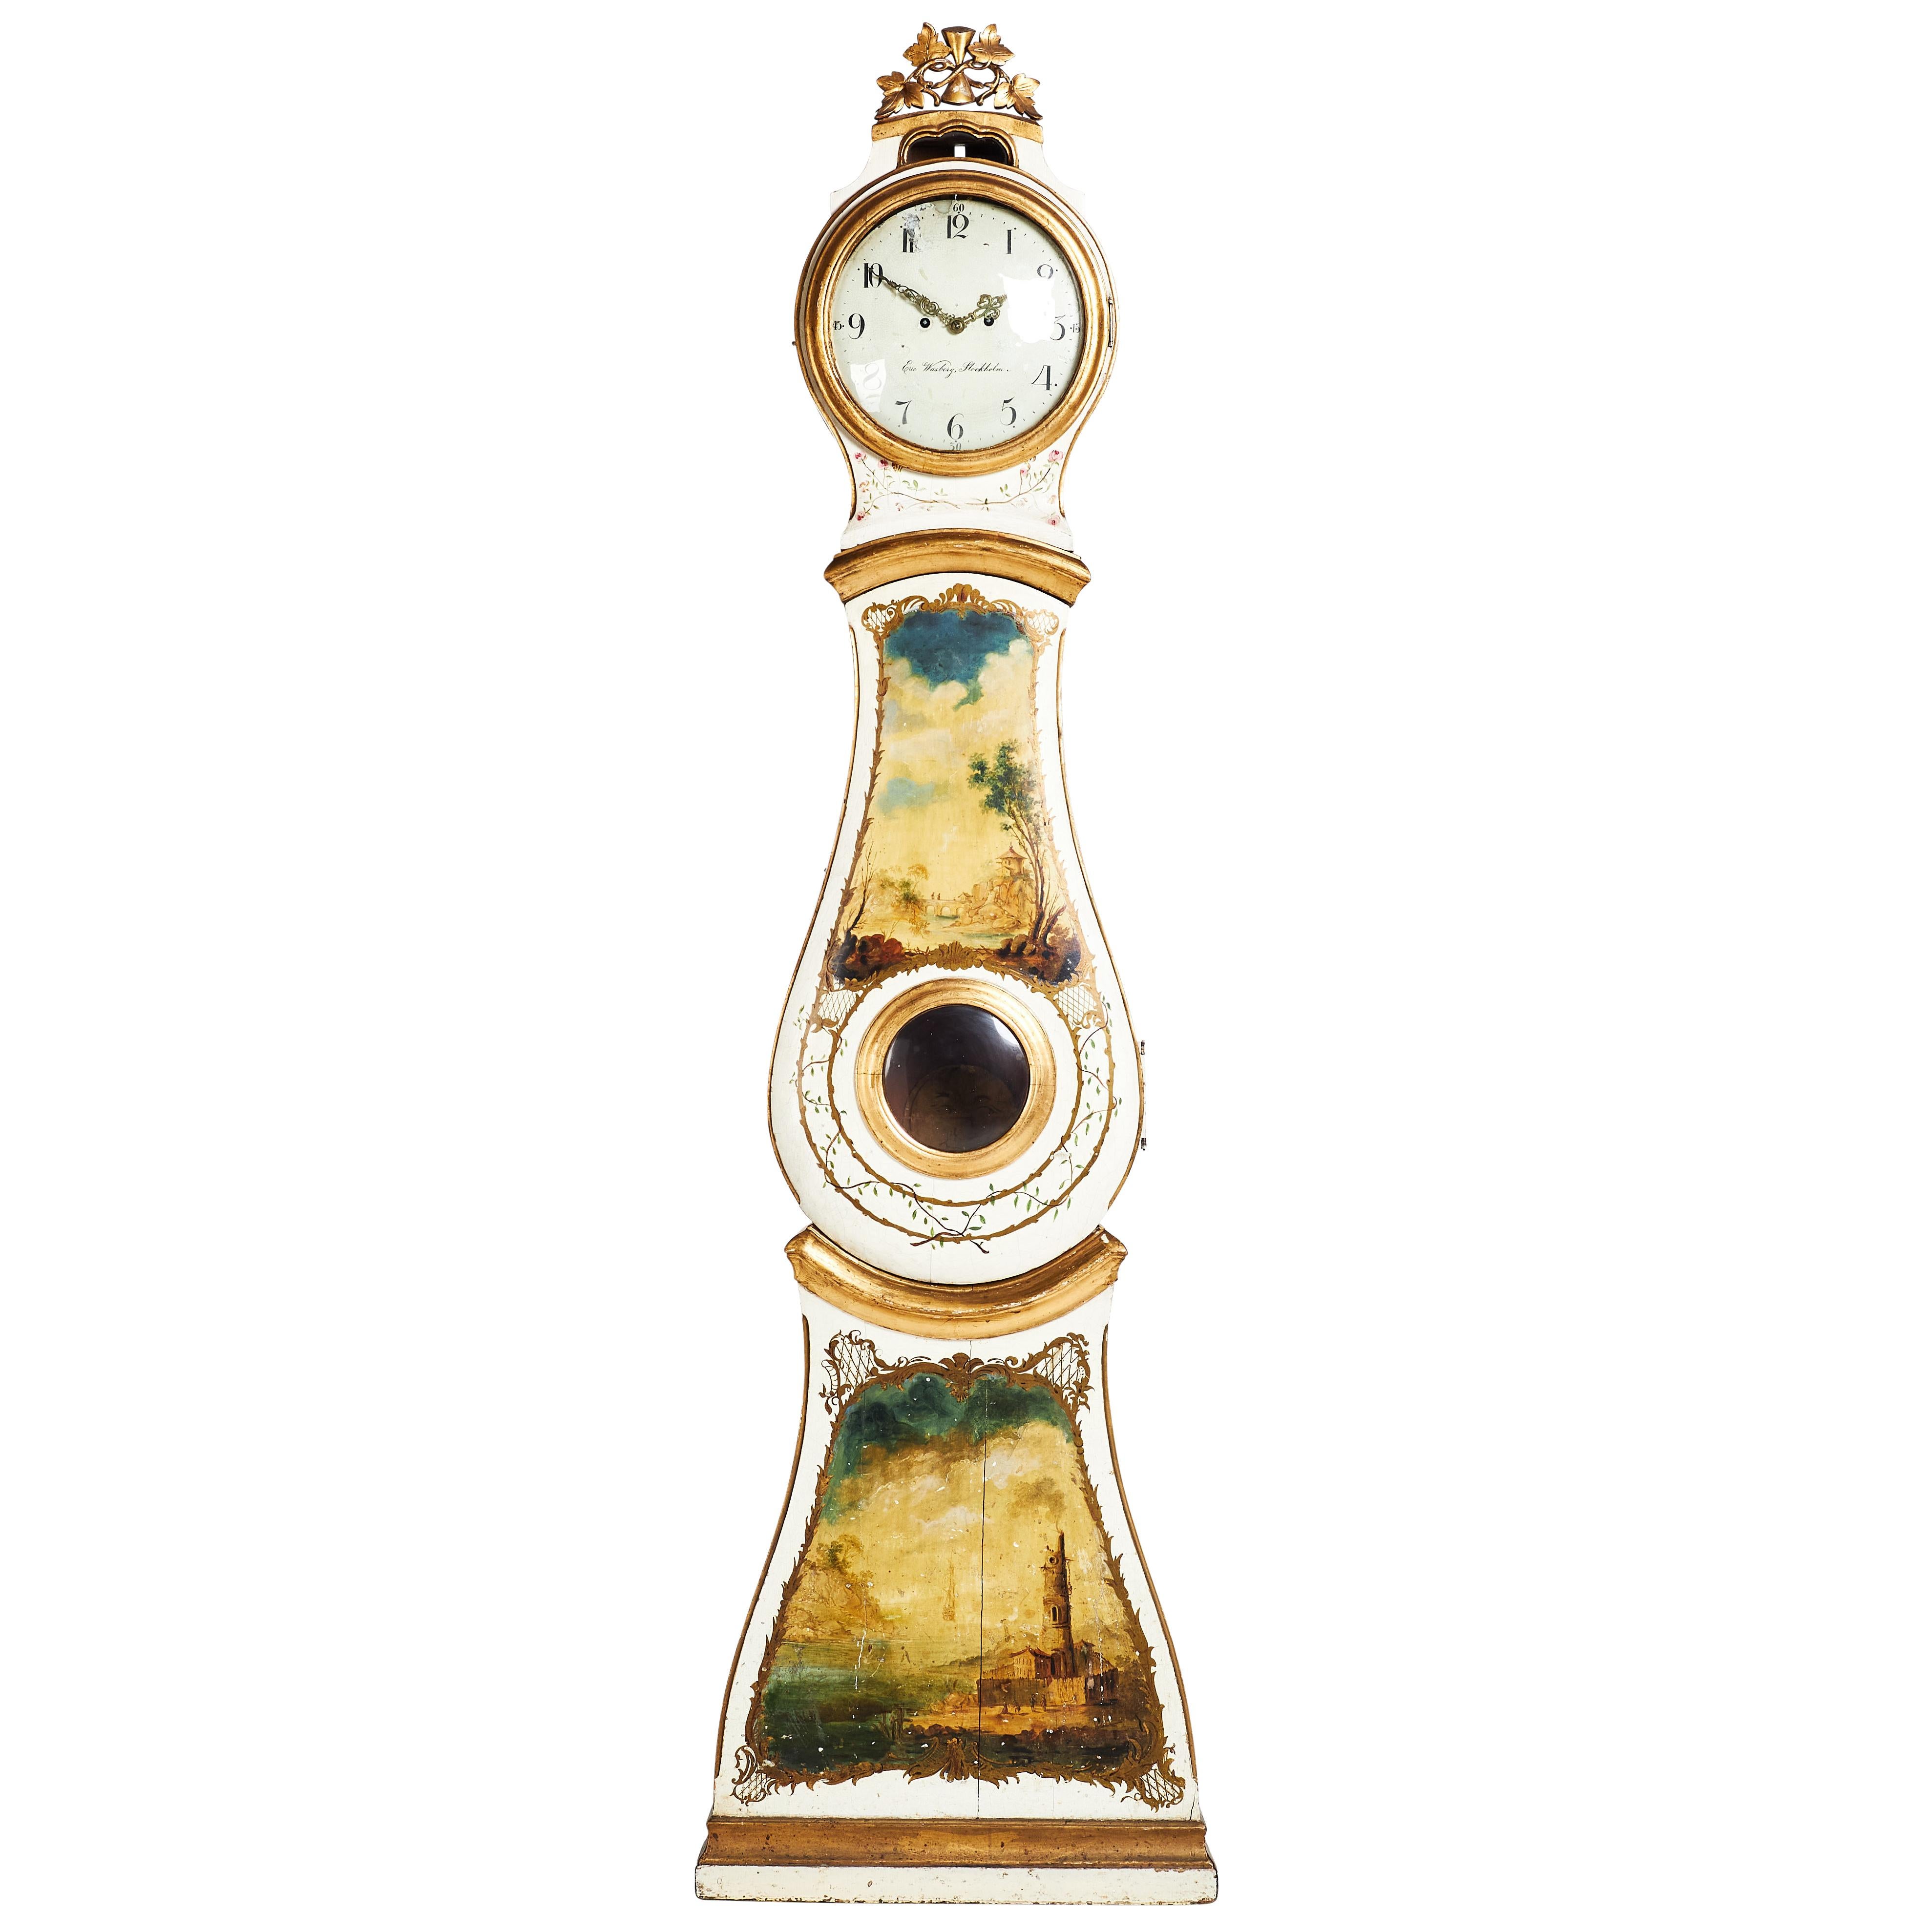 Antique Rococo Mora Clock with original decorative painting details. Case from Stockholm send half of 18th Century, dial inscribed by Eric Wasberg. Original mechanism with weights and pendulum. Gilded decorative details with painted landscape scenes